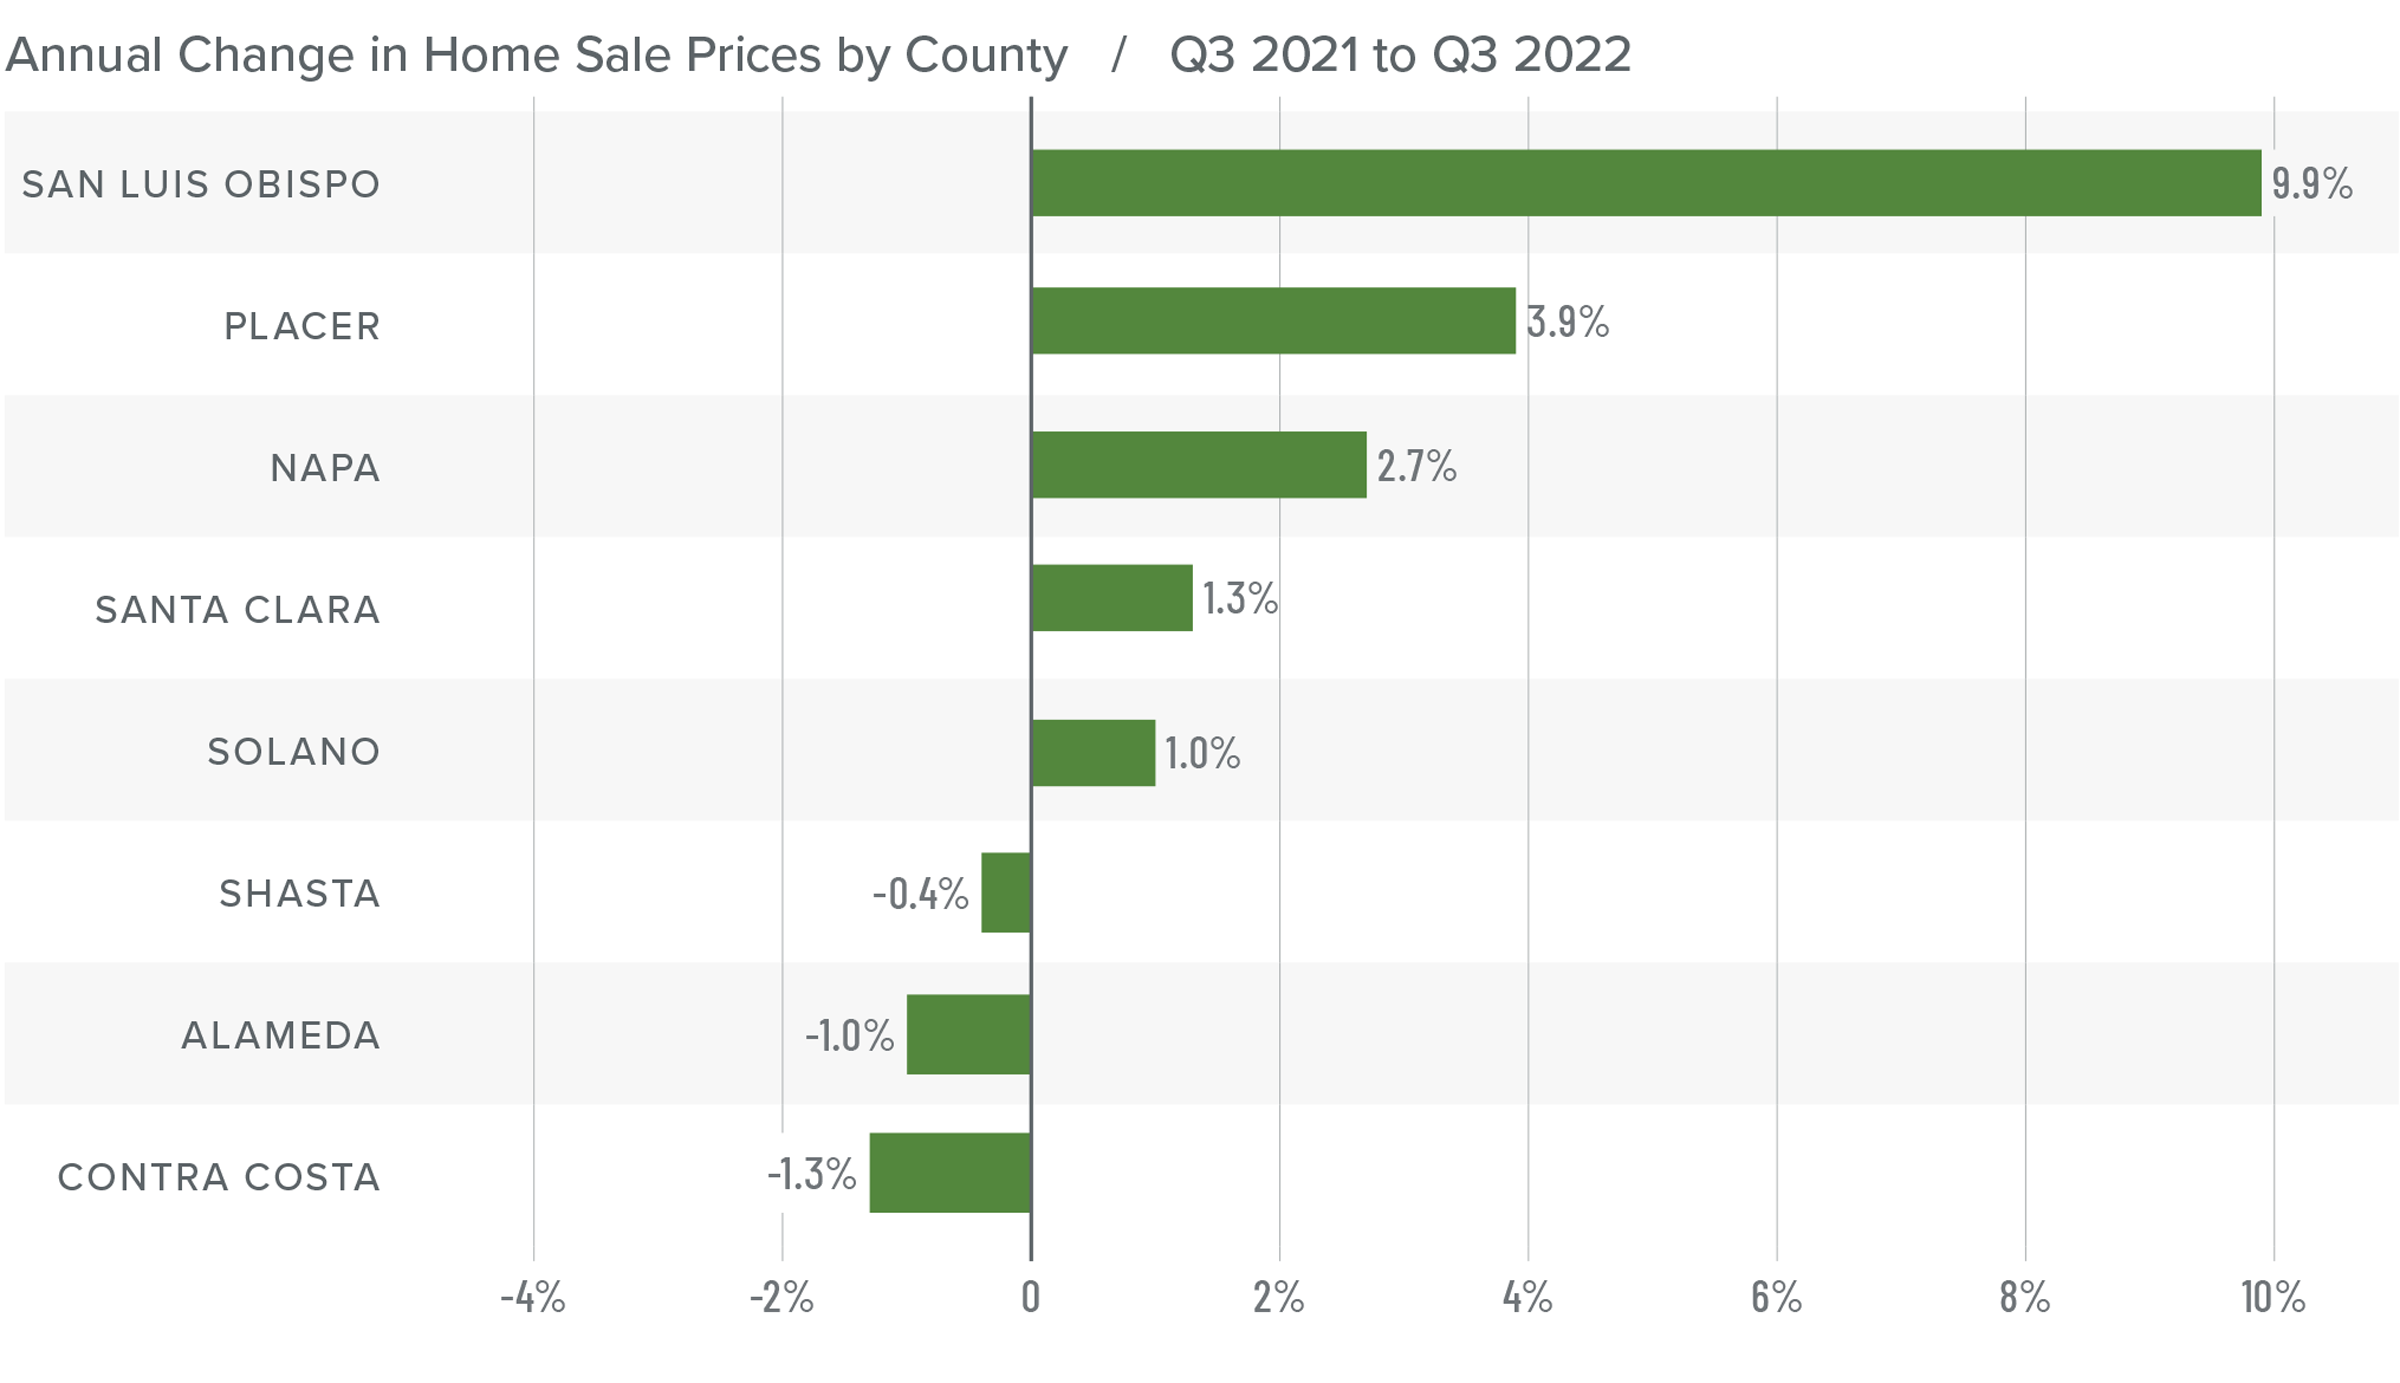 A bar graph showing the annual change in home sale prices for various counties in Northern California from Q3 2021 to Q3 2022. San Luis Obispo County tops the list at 9.9%, followed by Placer at 3.9%, Napa at 2.7%, Santa Clara at 1.3%, Solano at 1%, Shasta at -0.4%, Alameda at -1%, and Contra Costa at -1.3%.